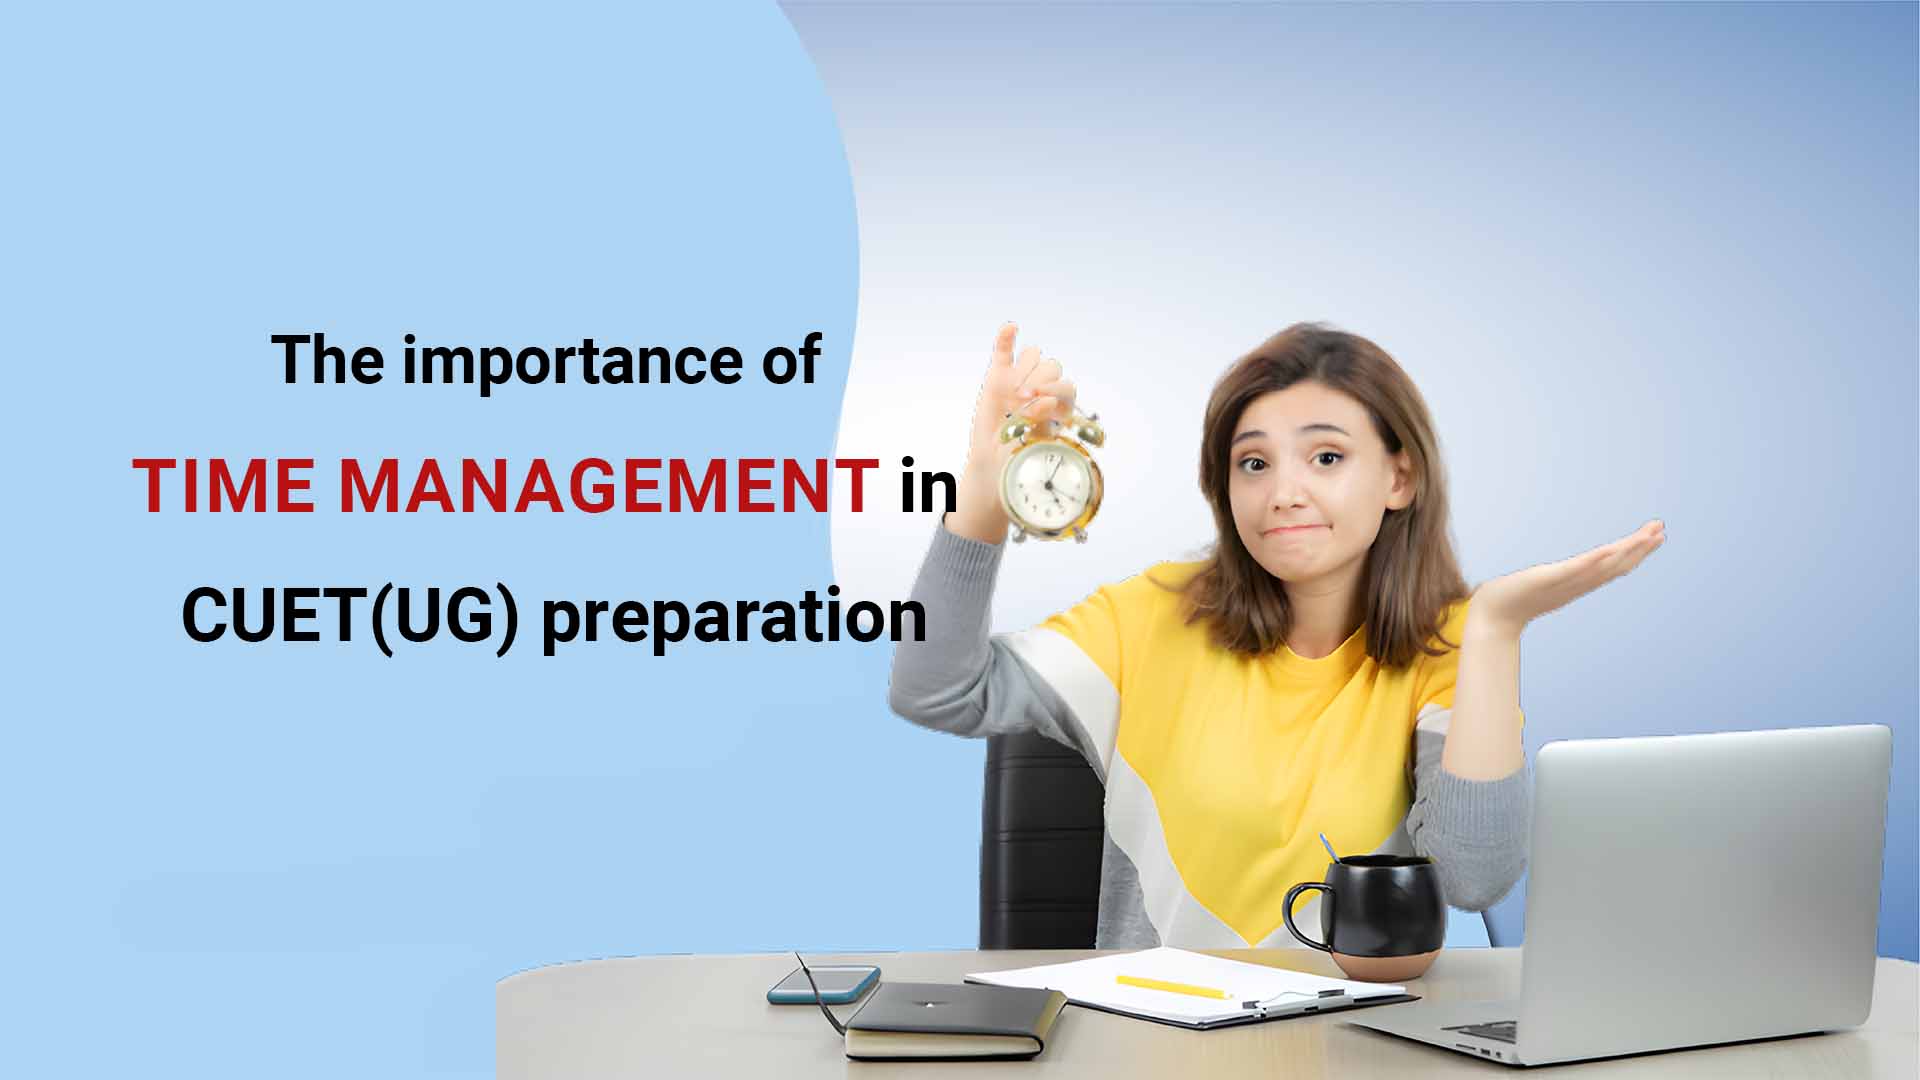 The importance of time management in CUET(UG) preparation